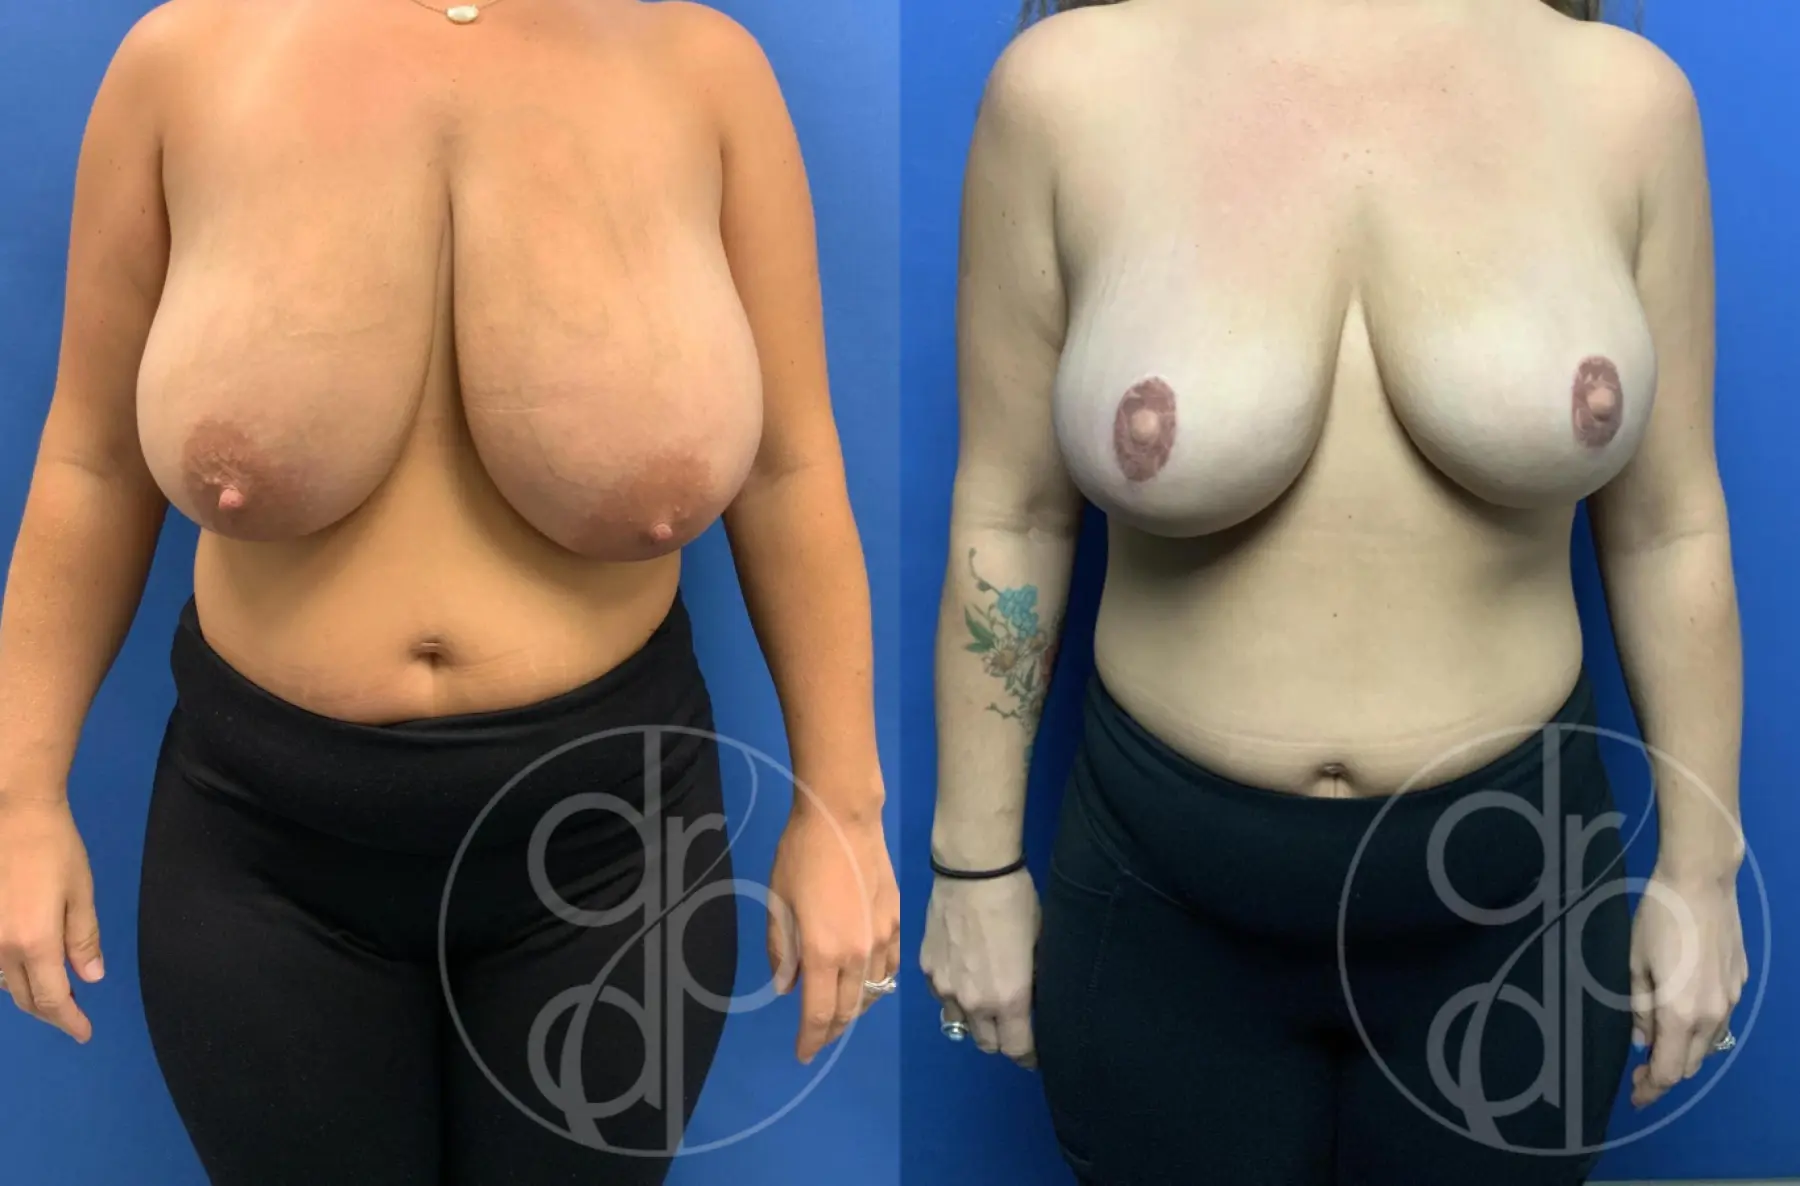 Breast Reconstruction: Patient 1 - Before and After 1